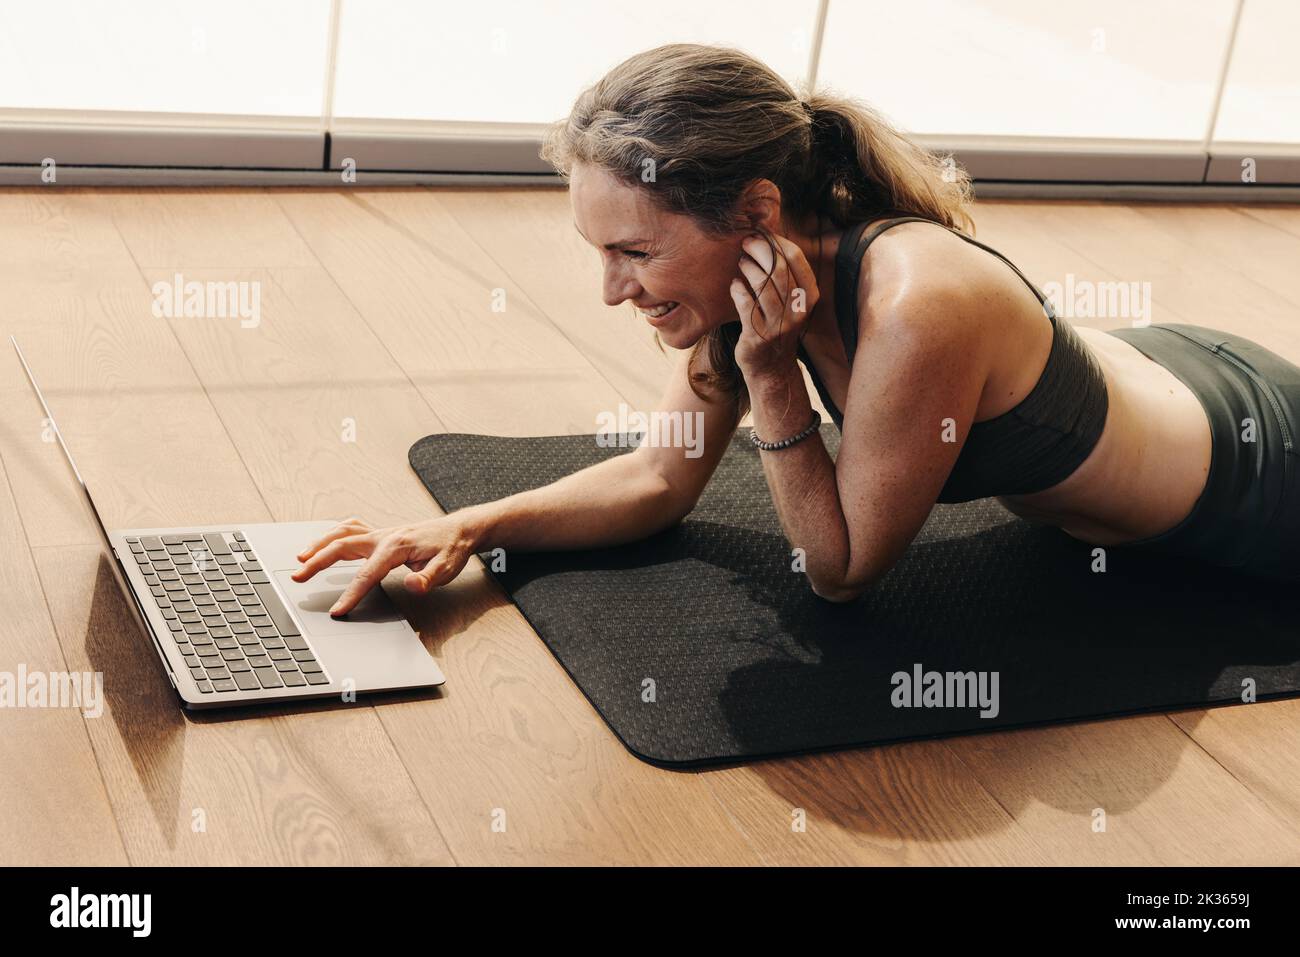 Senior woman smiling while joining an online fitness class on a laptop. Happy woman following an online yoga tutorial at home. Cheerful senior woman l Stock Photo